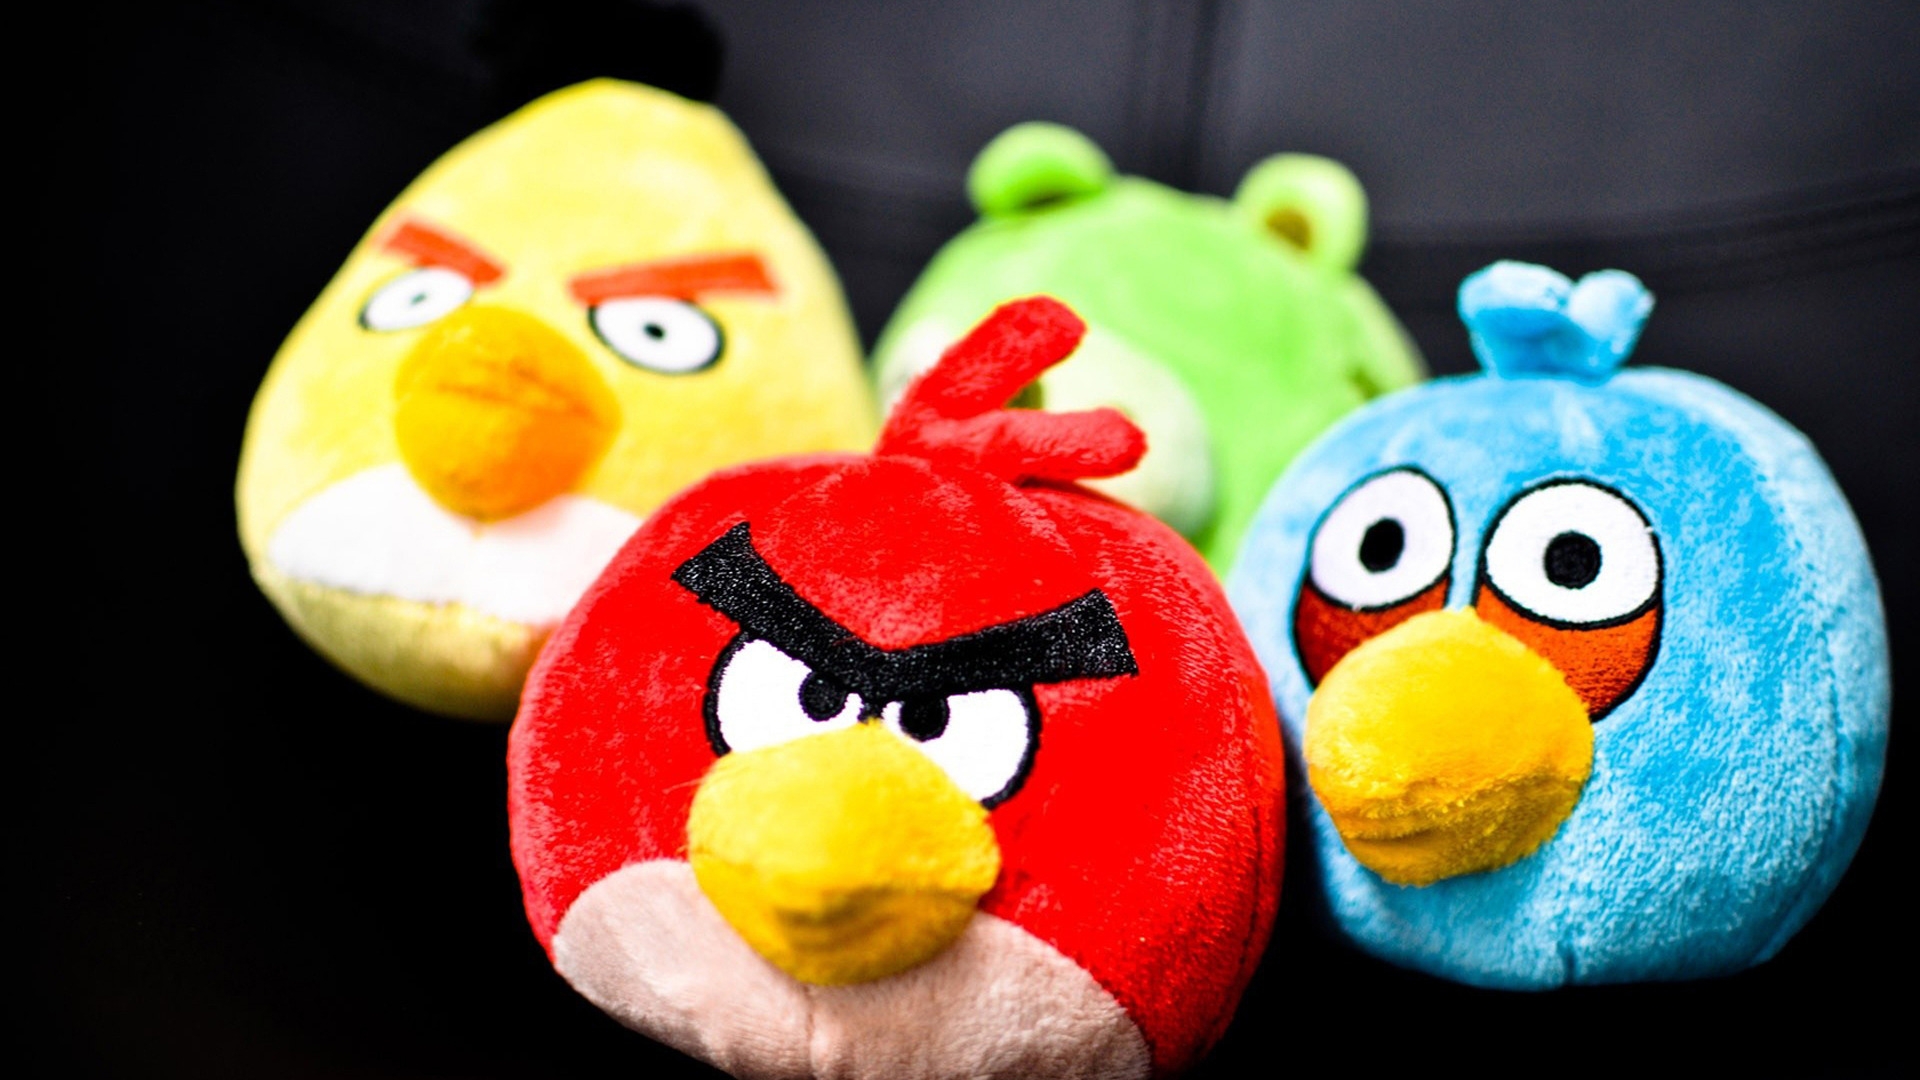 Angry Birds Toys for 1920 x 1080 HDTV 1080p resolution